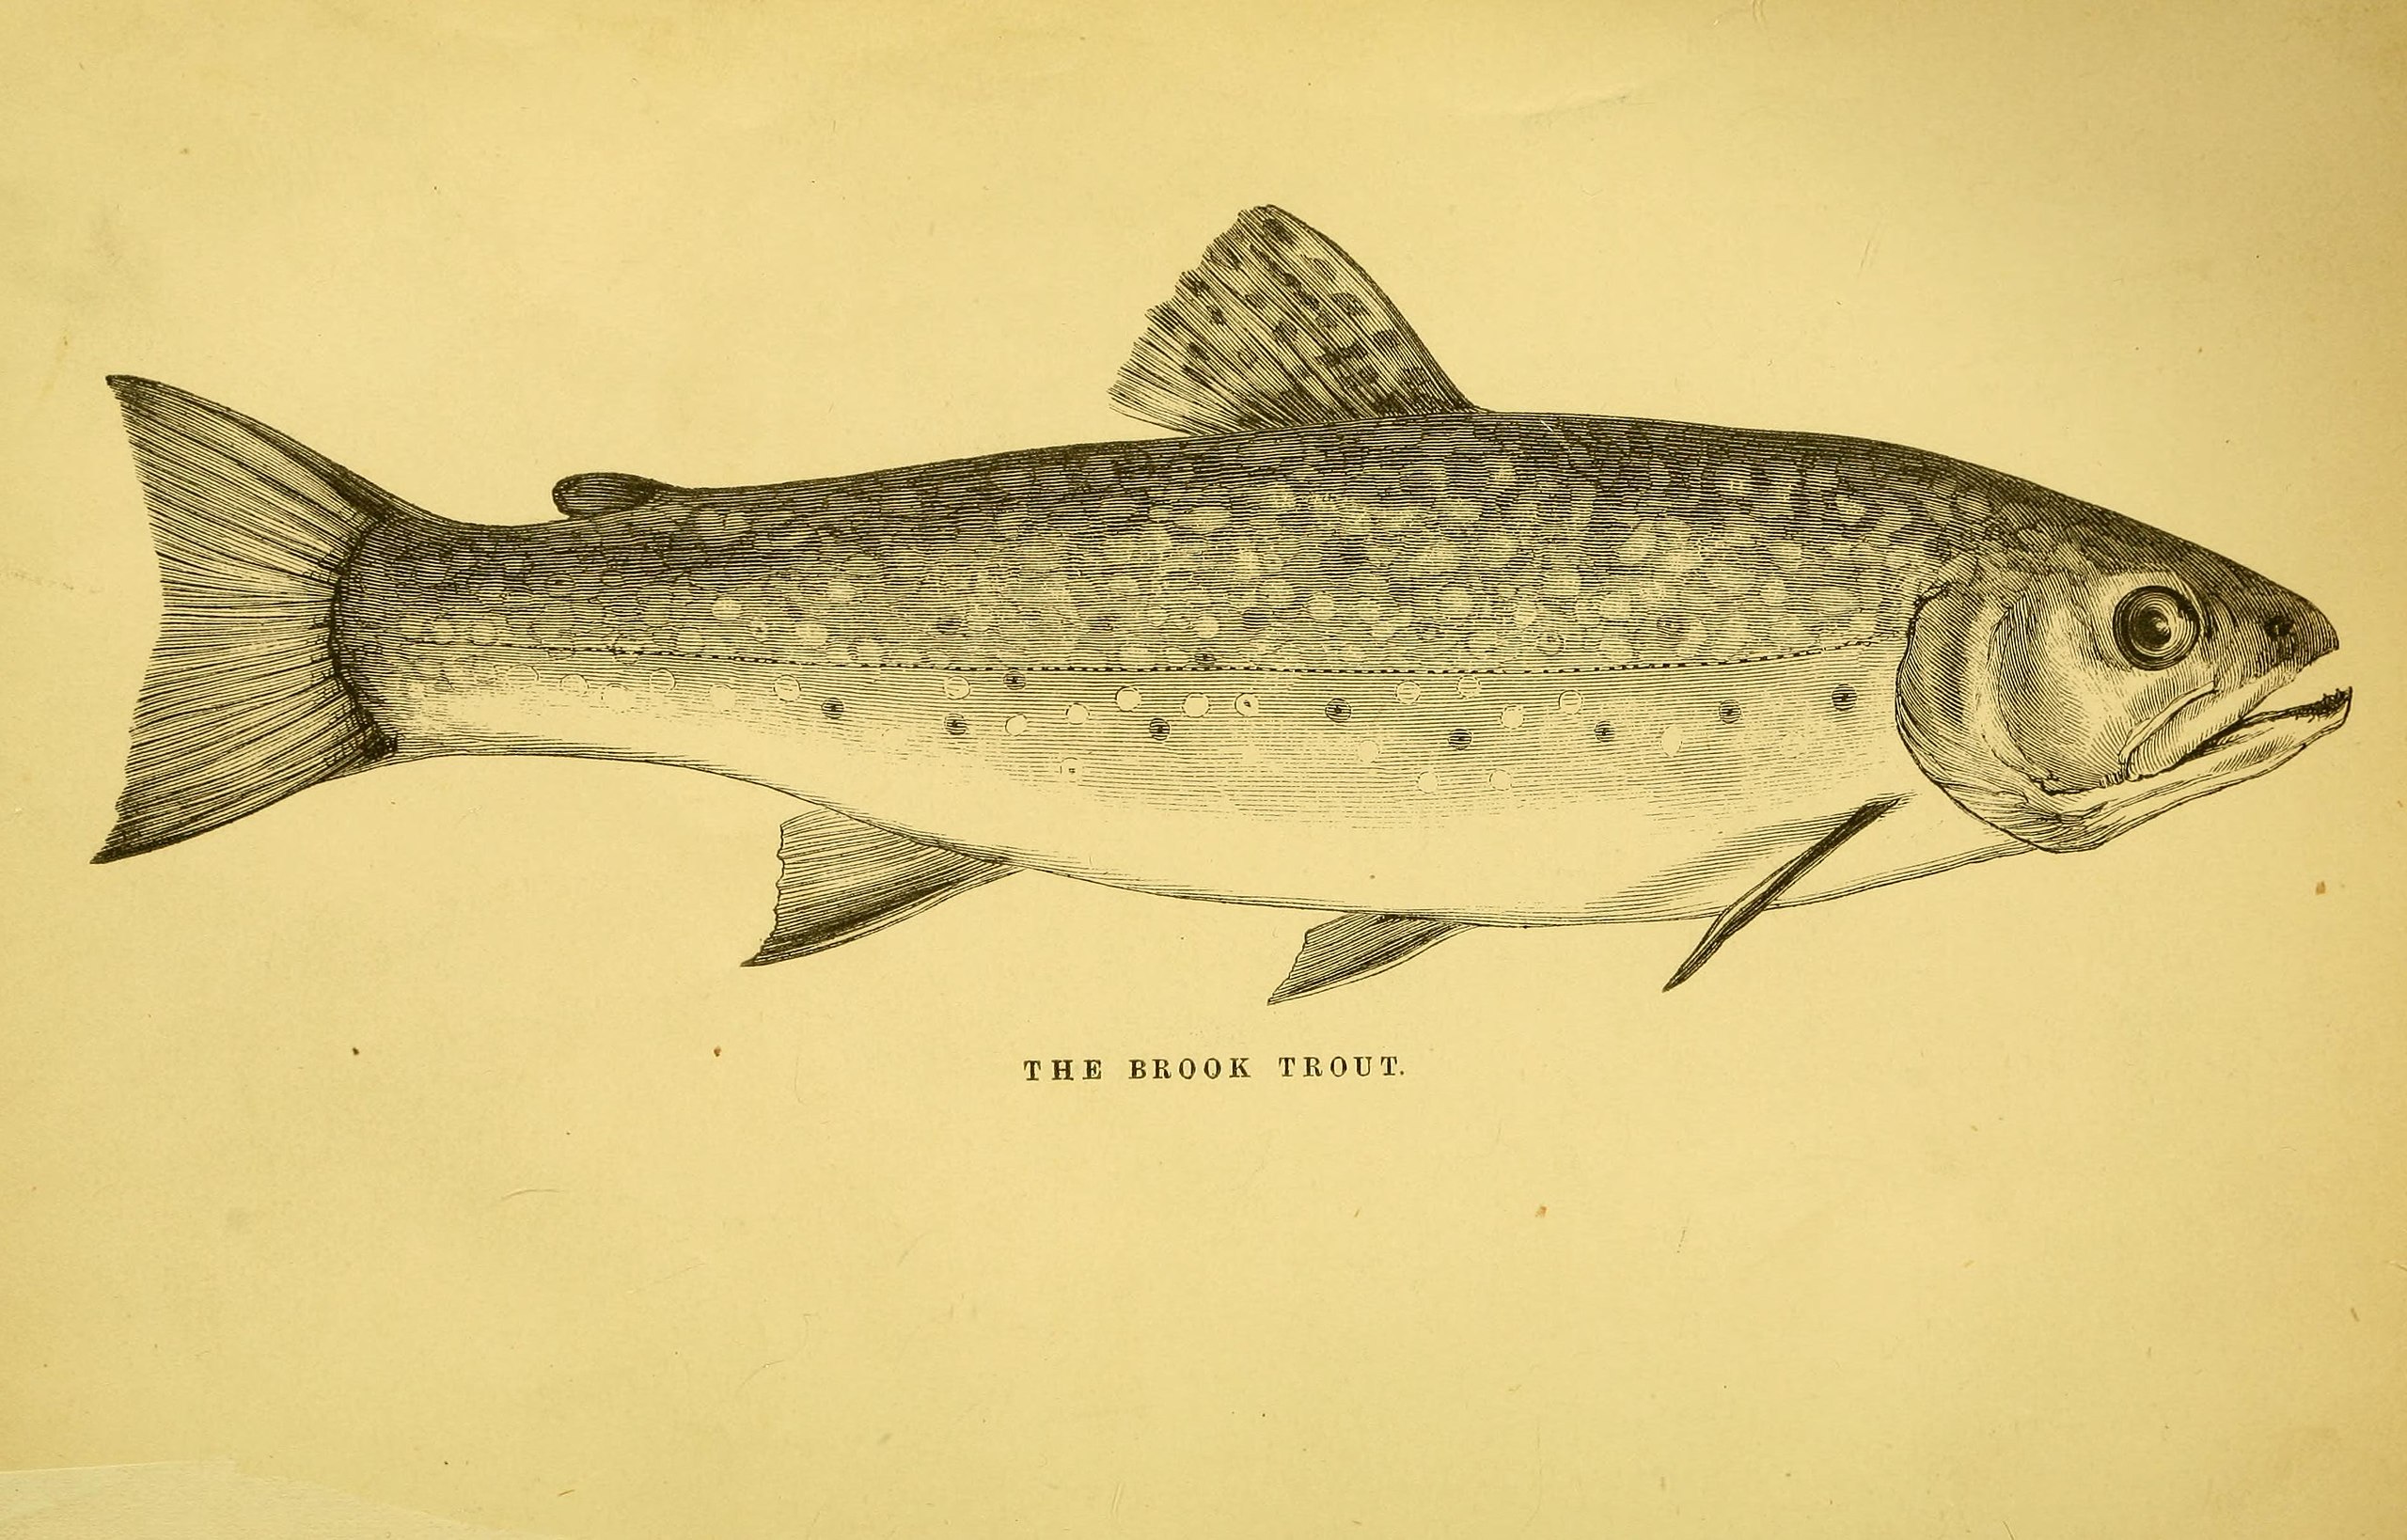 https://upload.wikimedia.org/wikipedia/commons/thumb/2/25/The_American_angler%27s_book_-_embracing_the_natural_history_of_sporting_fish%2C_and_the_art_of_taking_them_-_with_instructions_in_fly-fishing%2C_fly-making%2C_and_rod-making%2C_and_directions_for_fish-breeding_%2817924473579%29.jpg/2560px-thumbnail.jpg